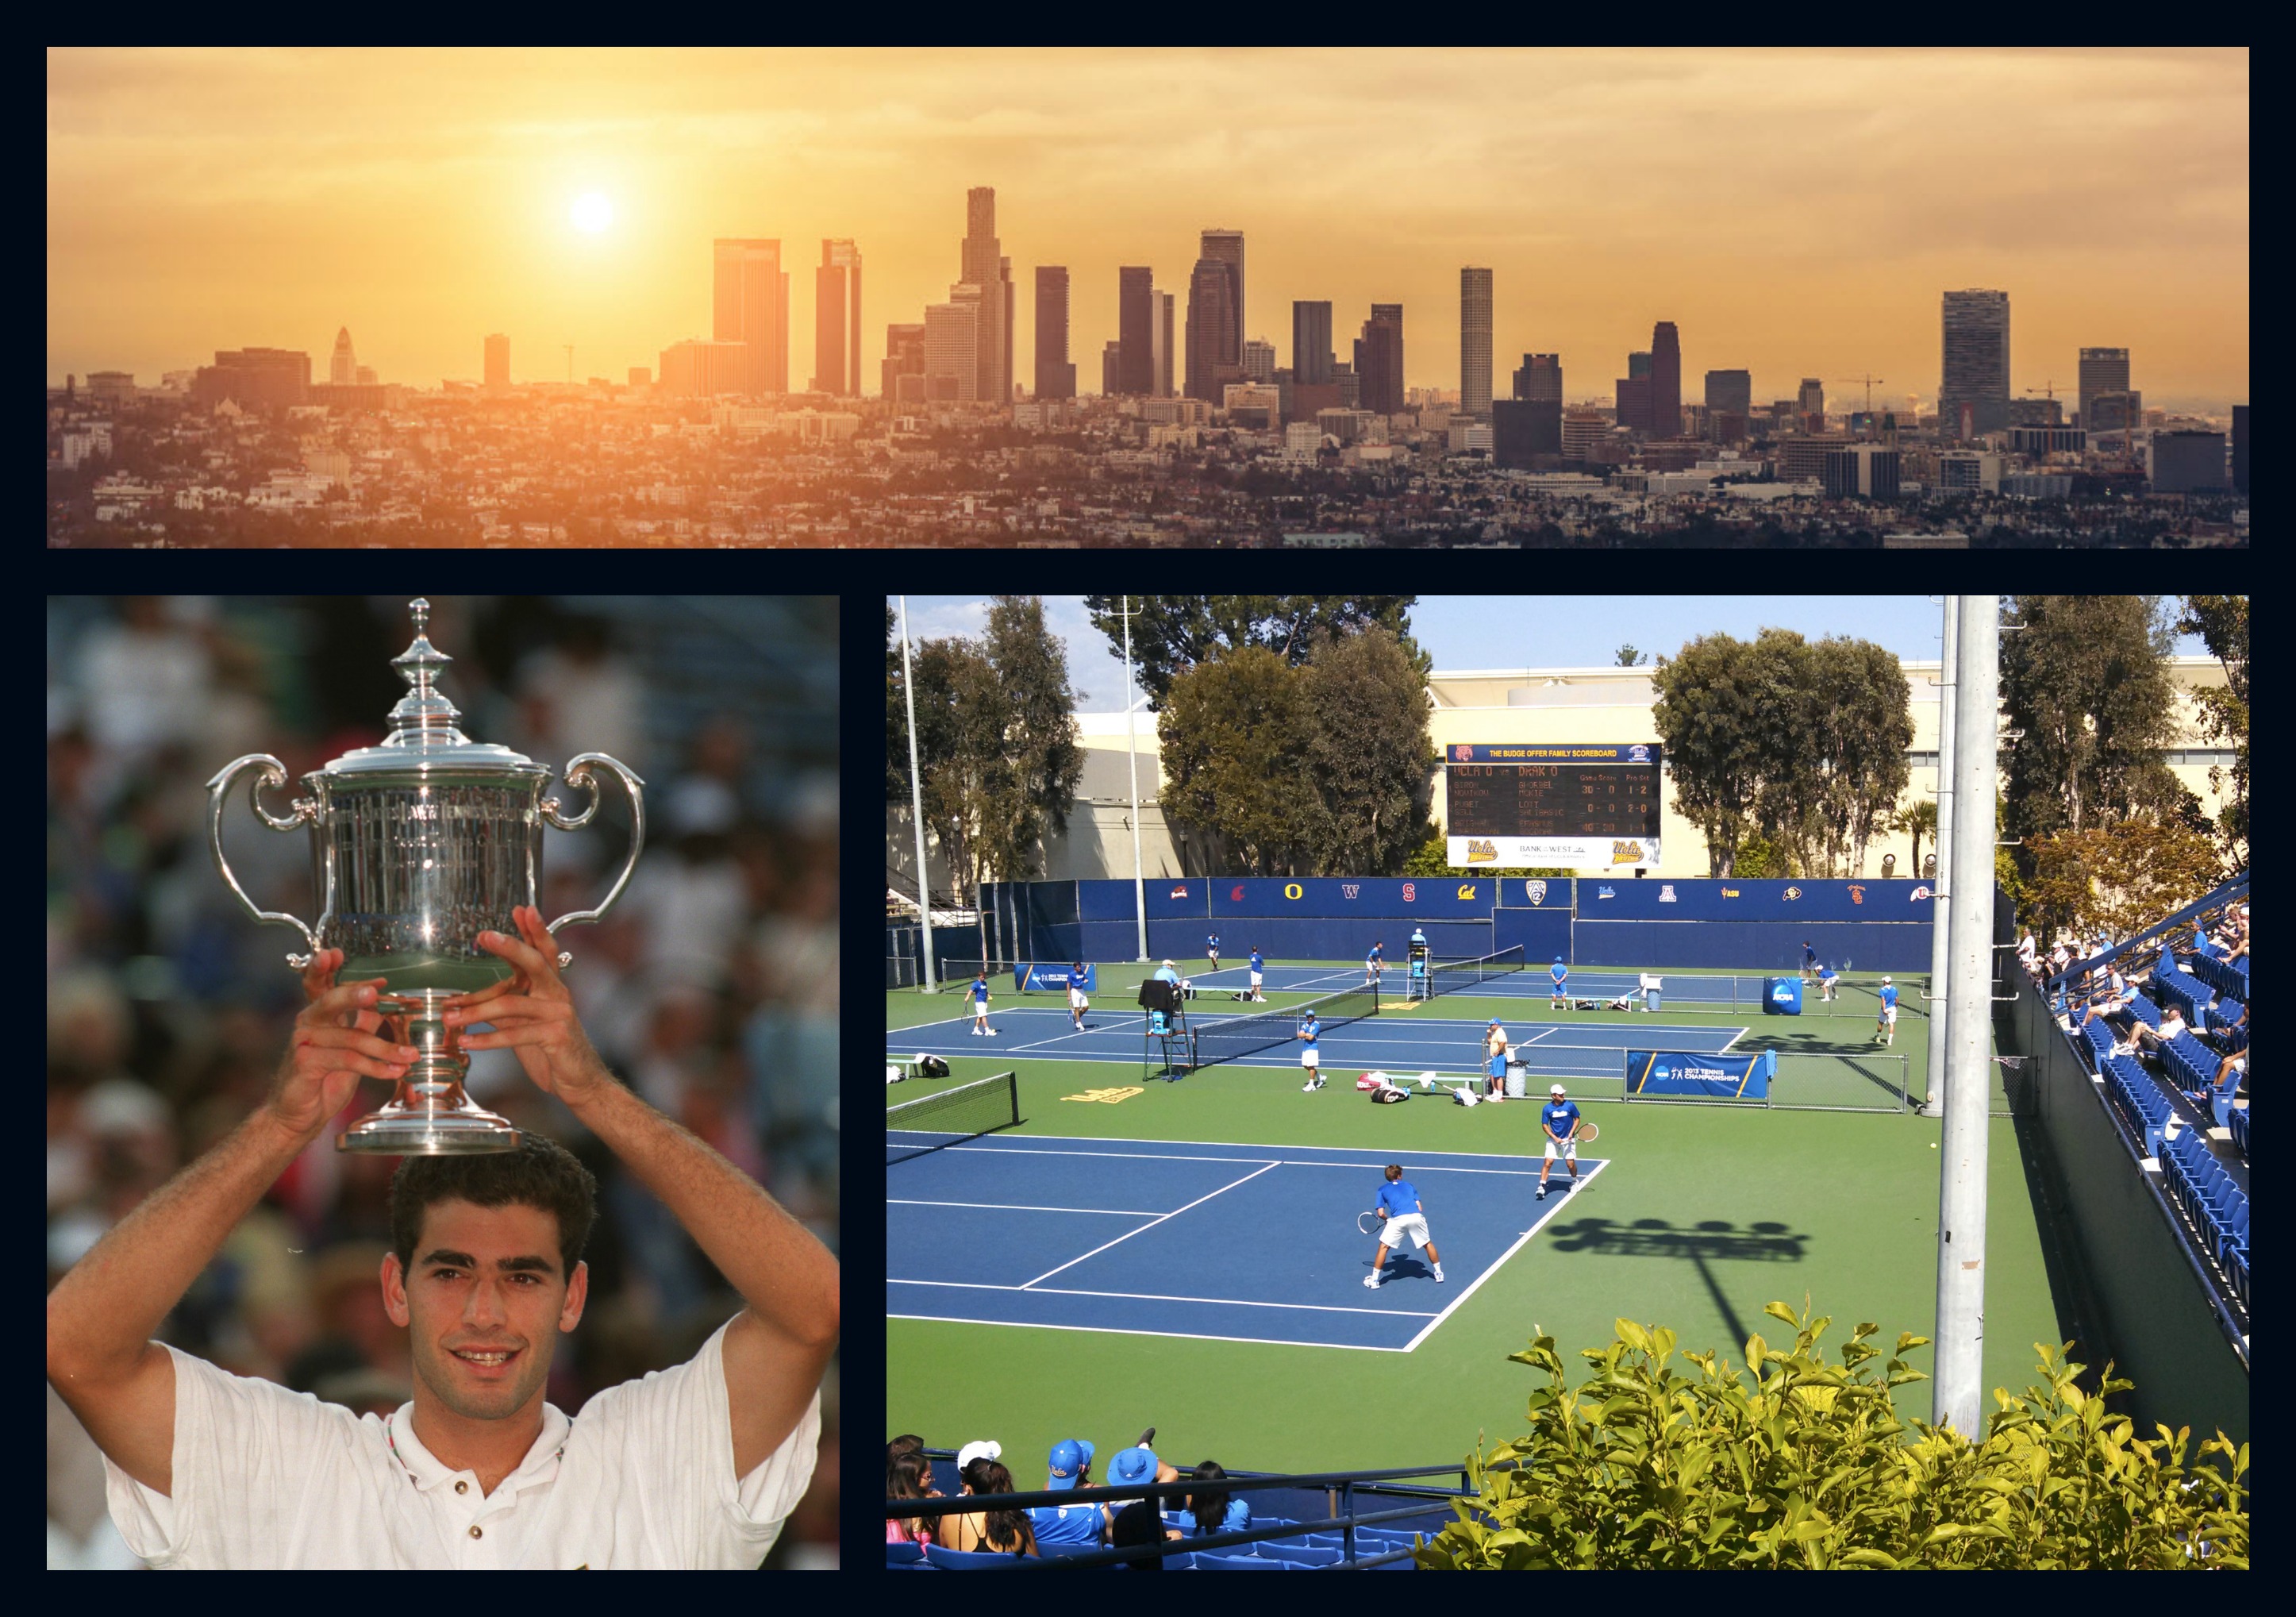 Clockwise from top: Los Angeles skyline, UCLA tennis courts, Pete Sampras